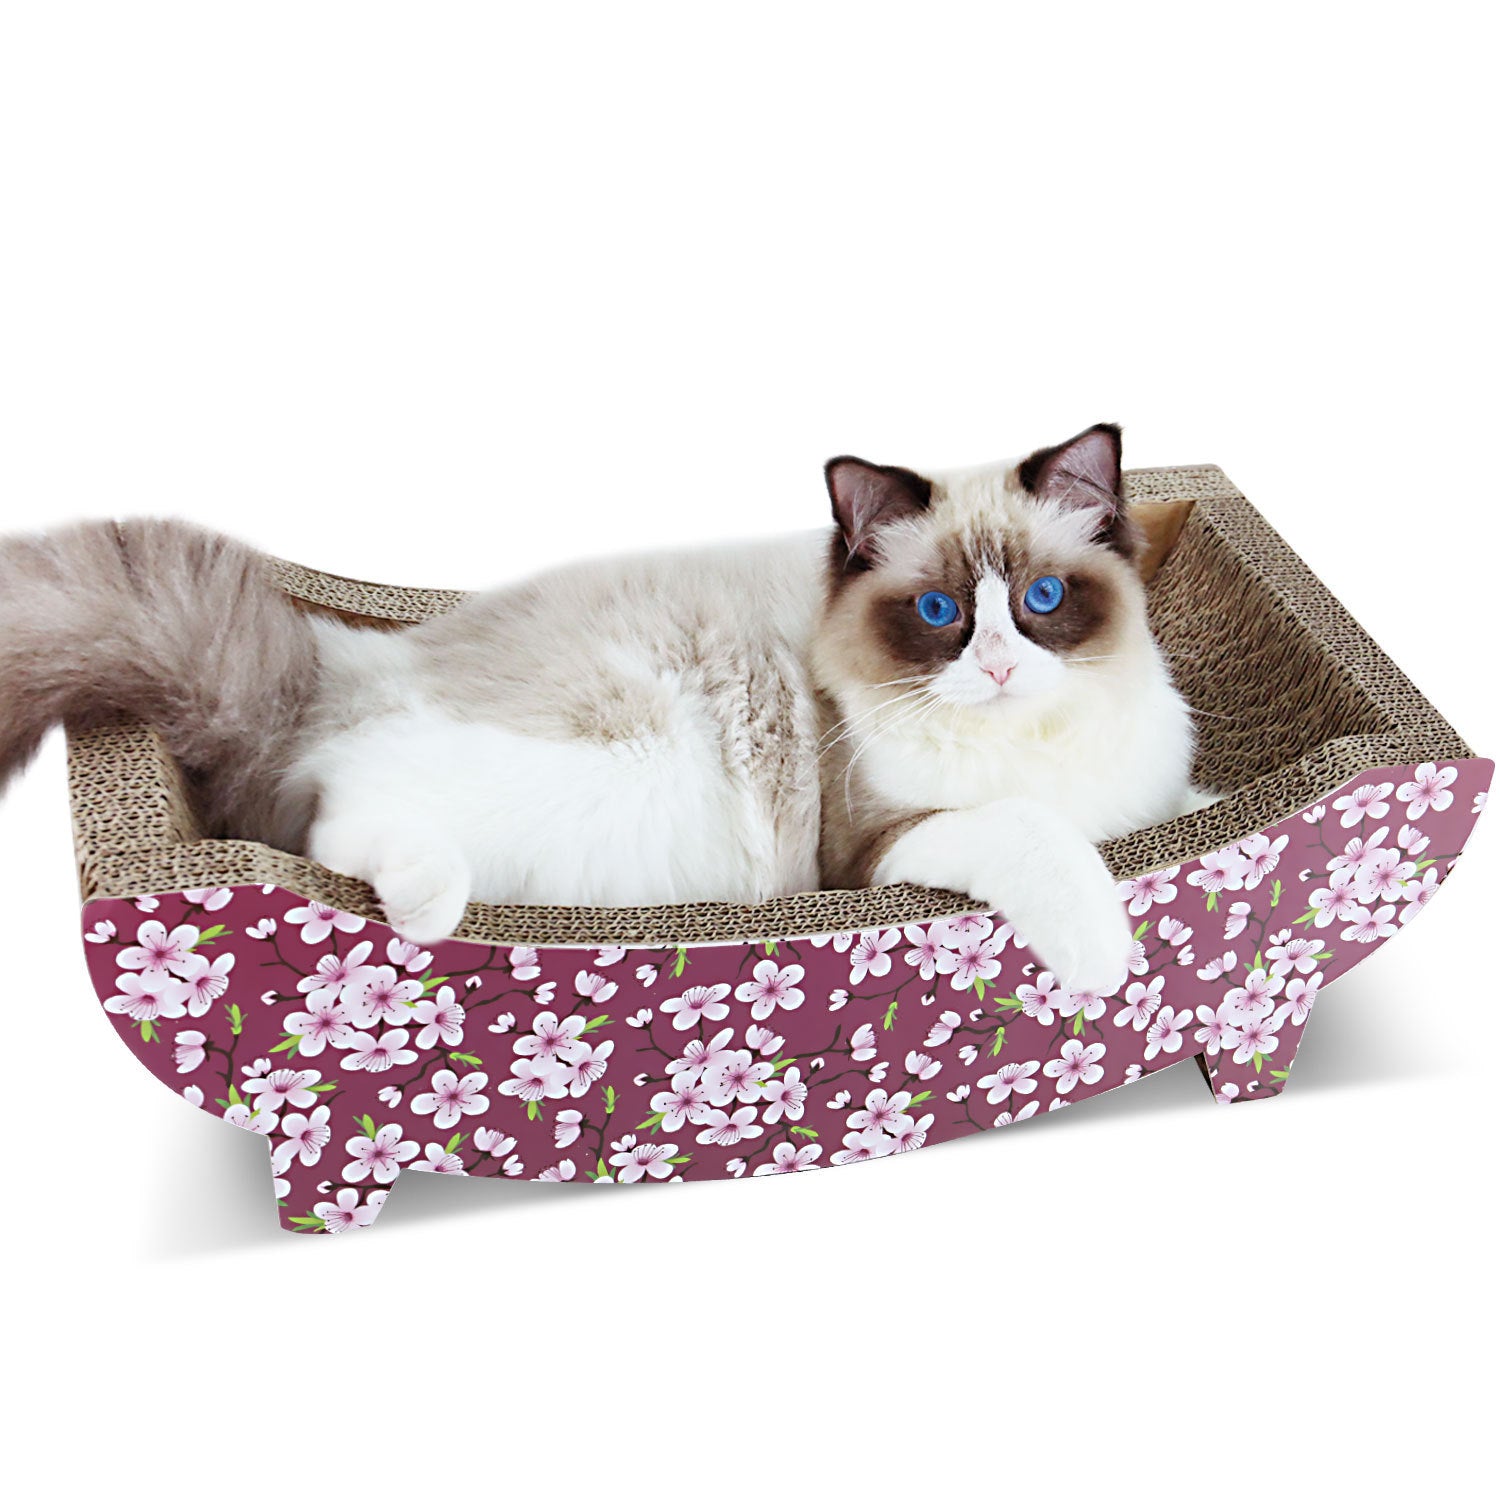 ScratchMe Cat Scratching Post Lounge Bed , Boat Shape Cat Scratcher Cardboard, Durable Recycle Board Pads Prevents Furniture Damage